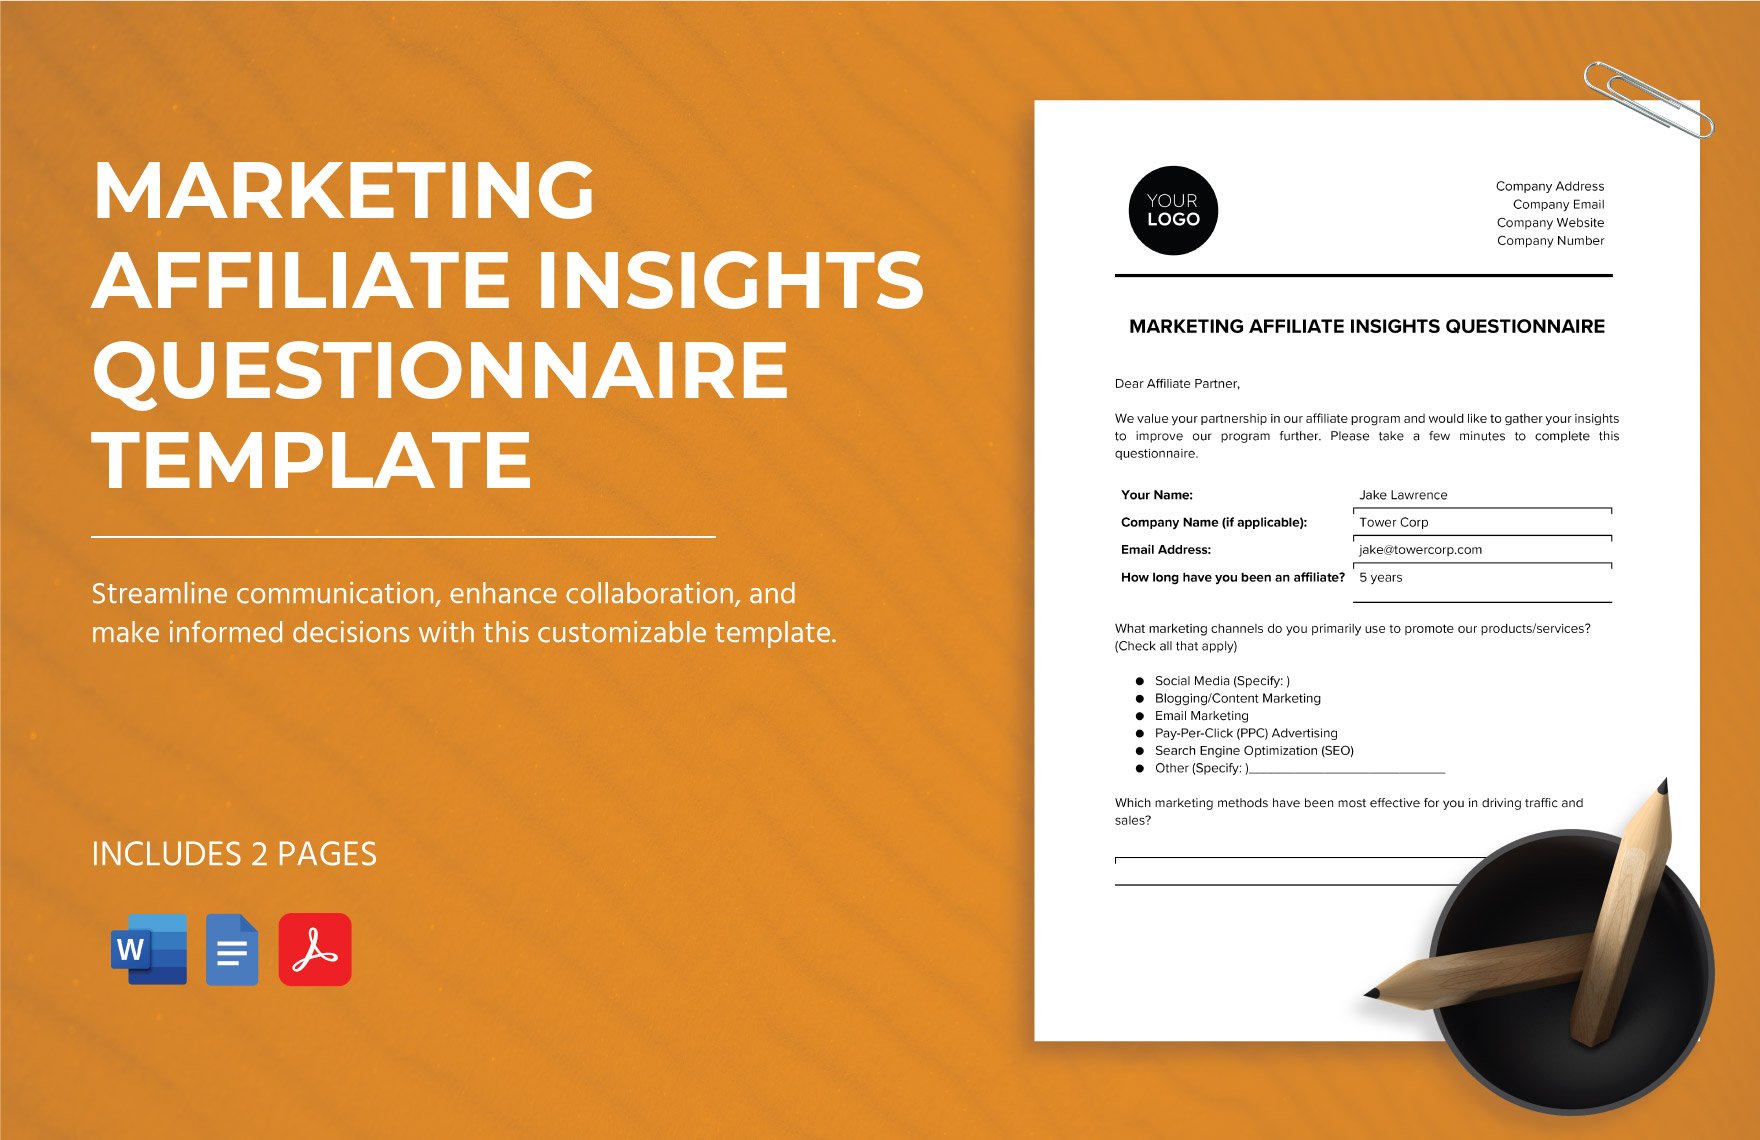 Marketing Affiliate Insights Questionnaire Template in Word, Google Docs, PDF